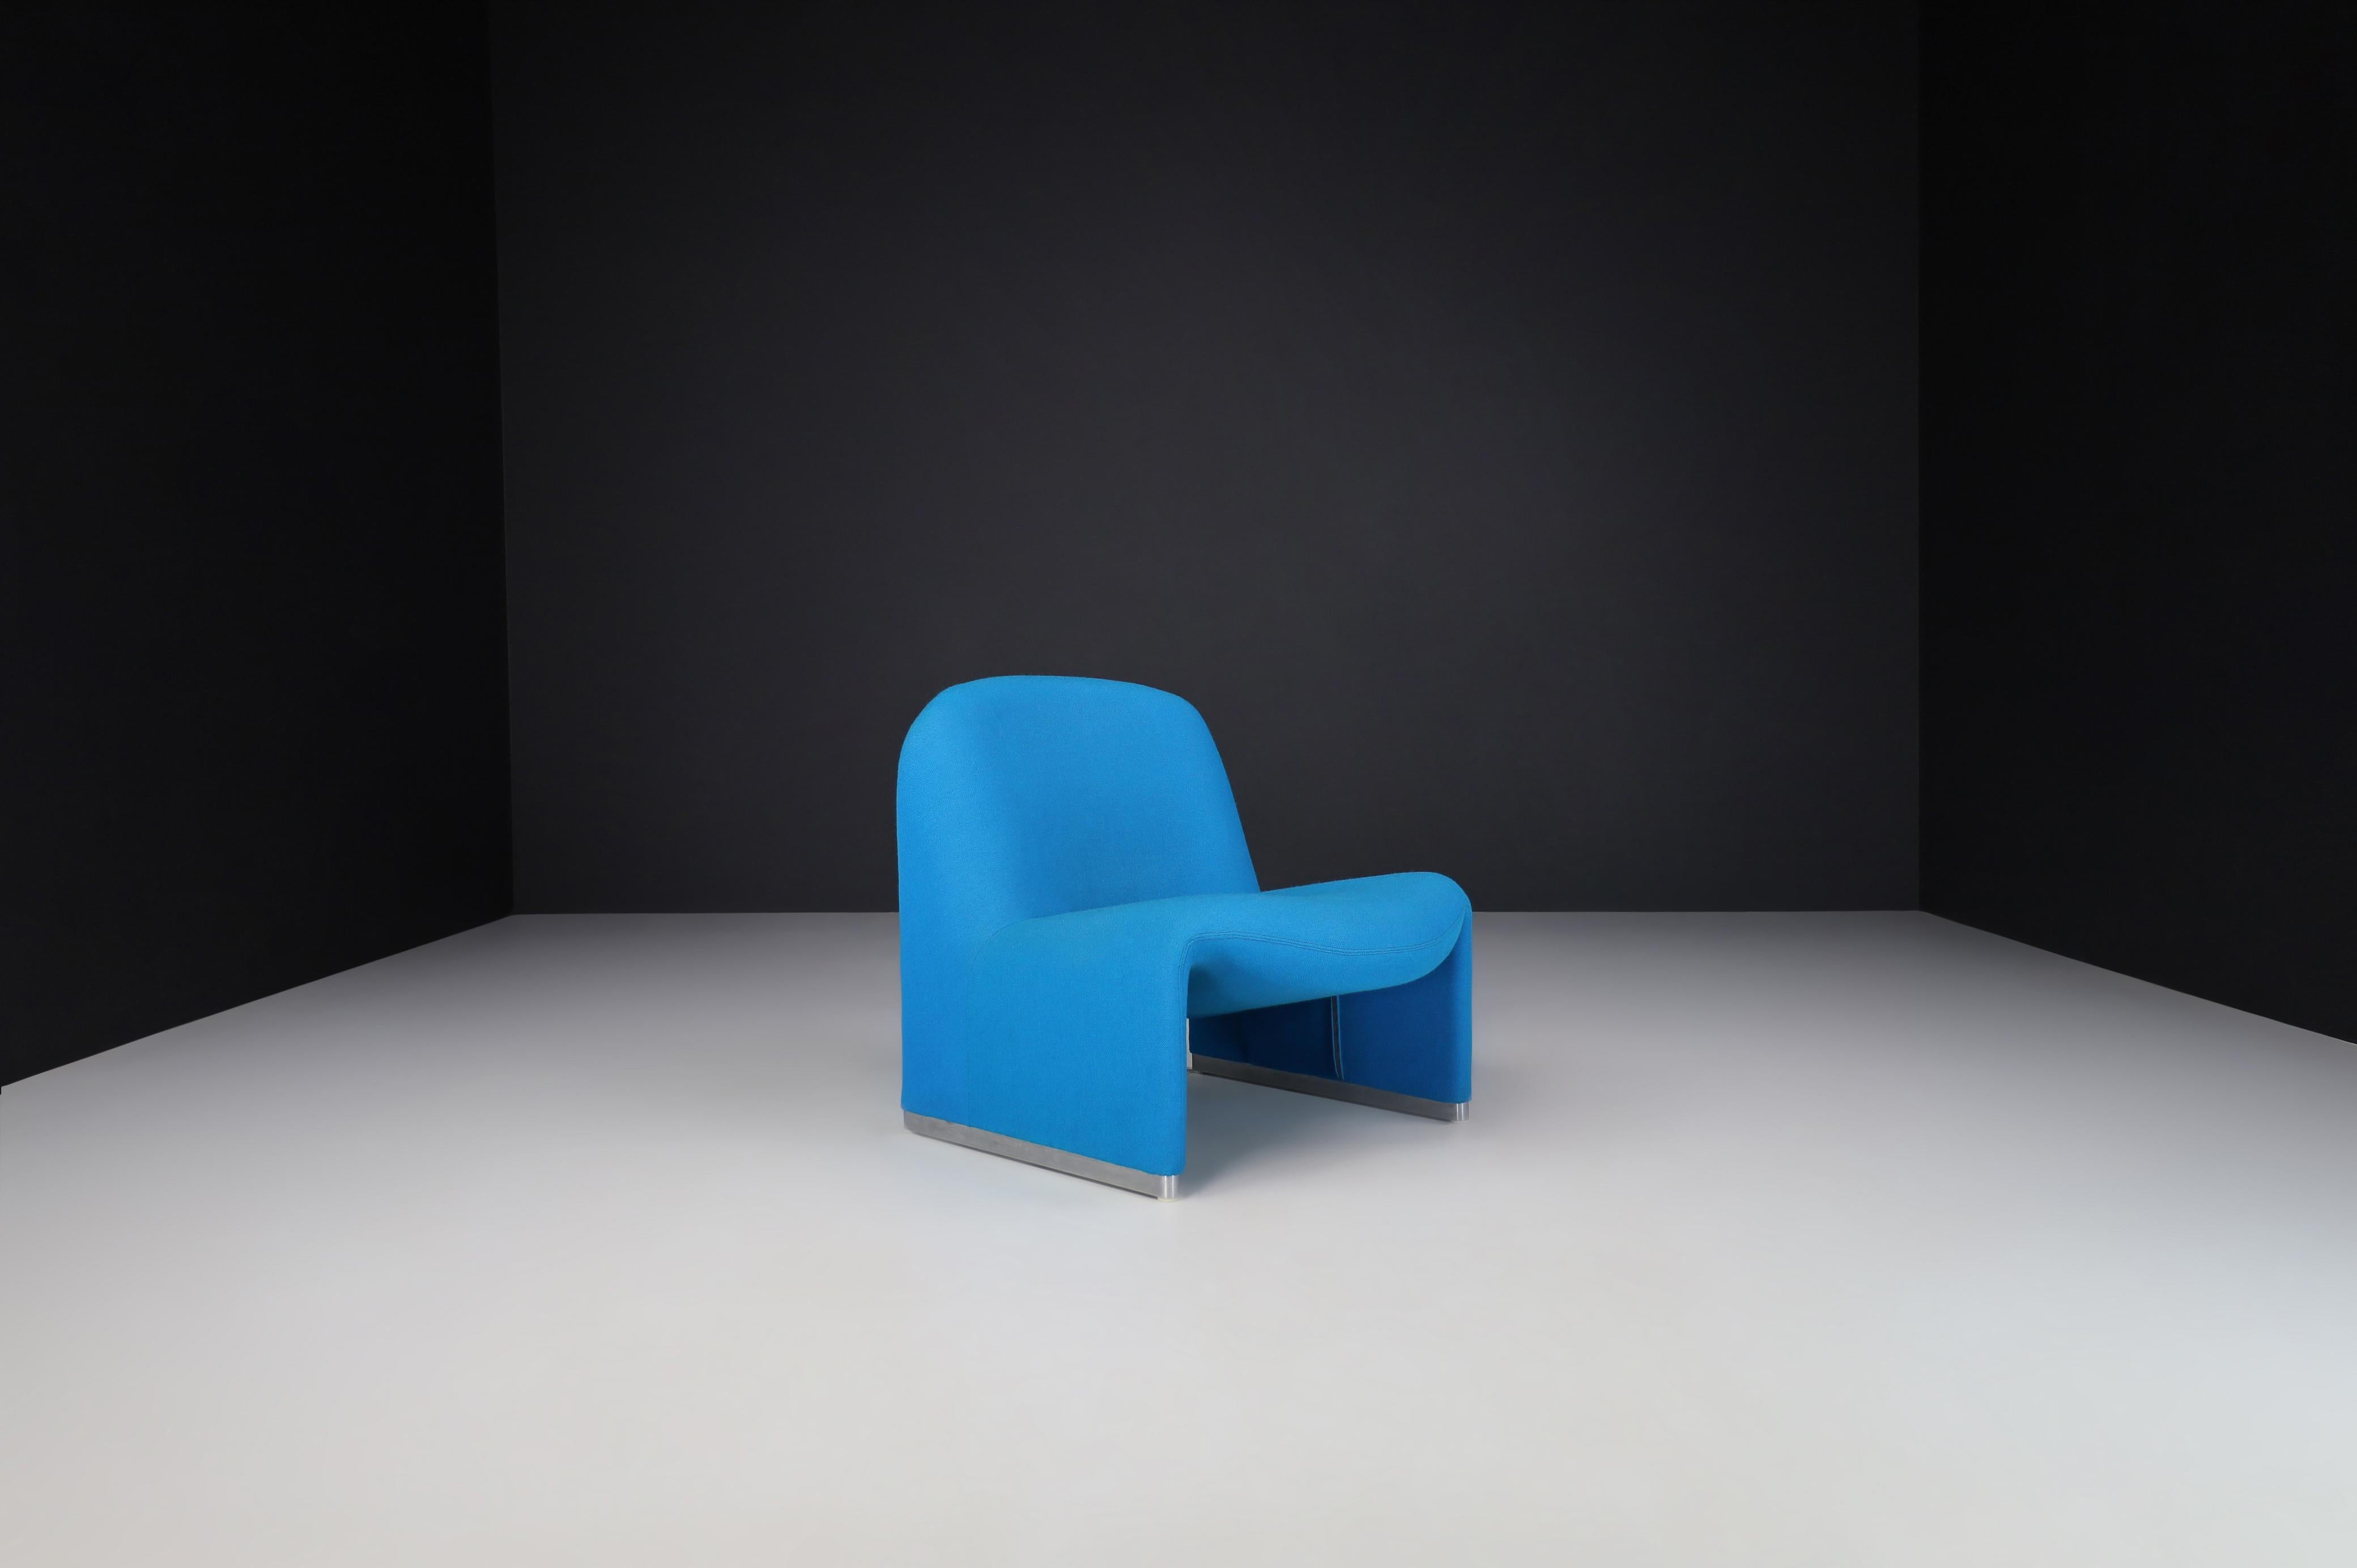 Metal Giancarlo Piretti Alky Chairs in Original Blue Upholstery, Italy 1969